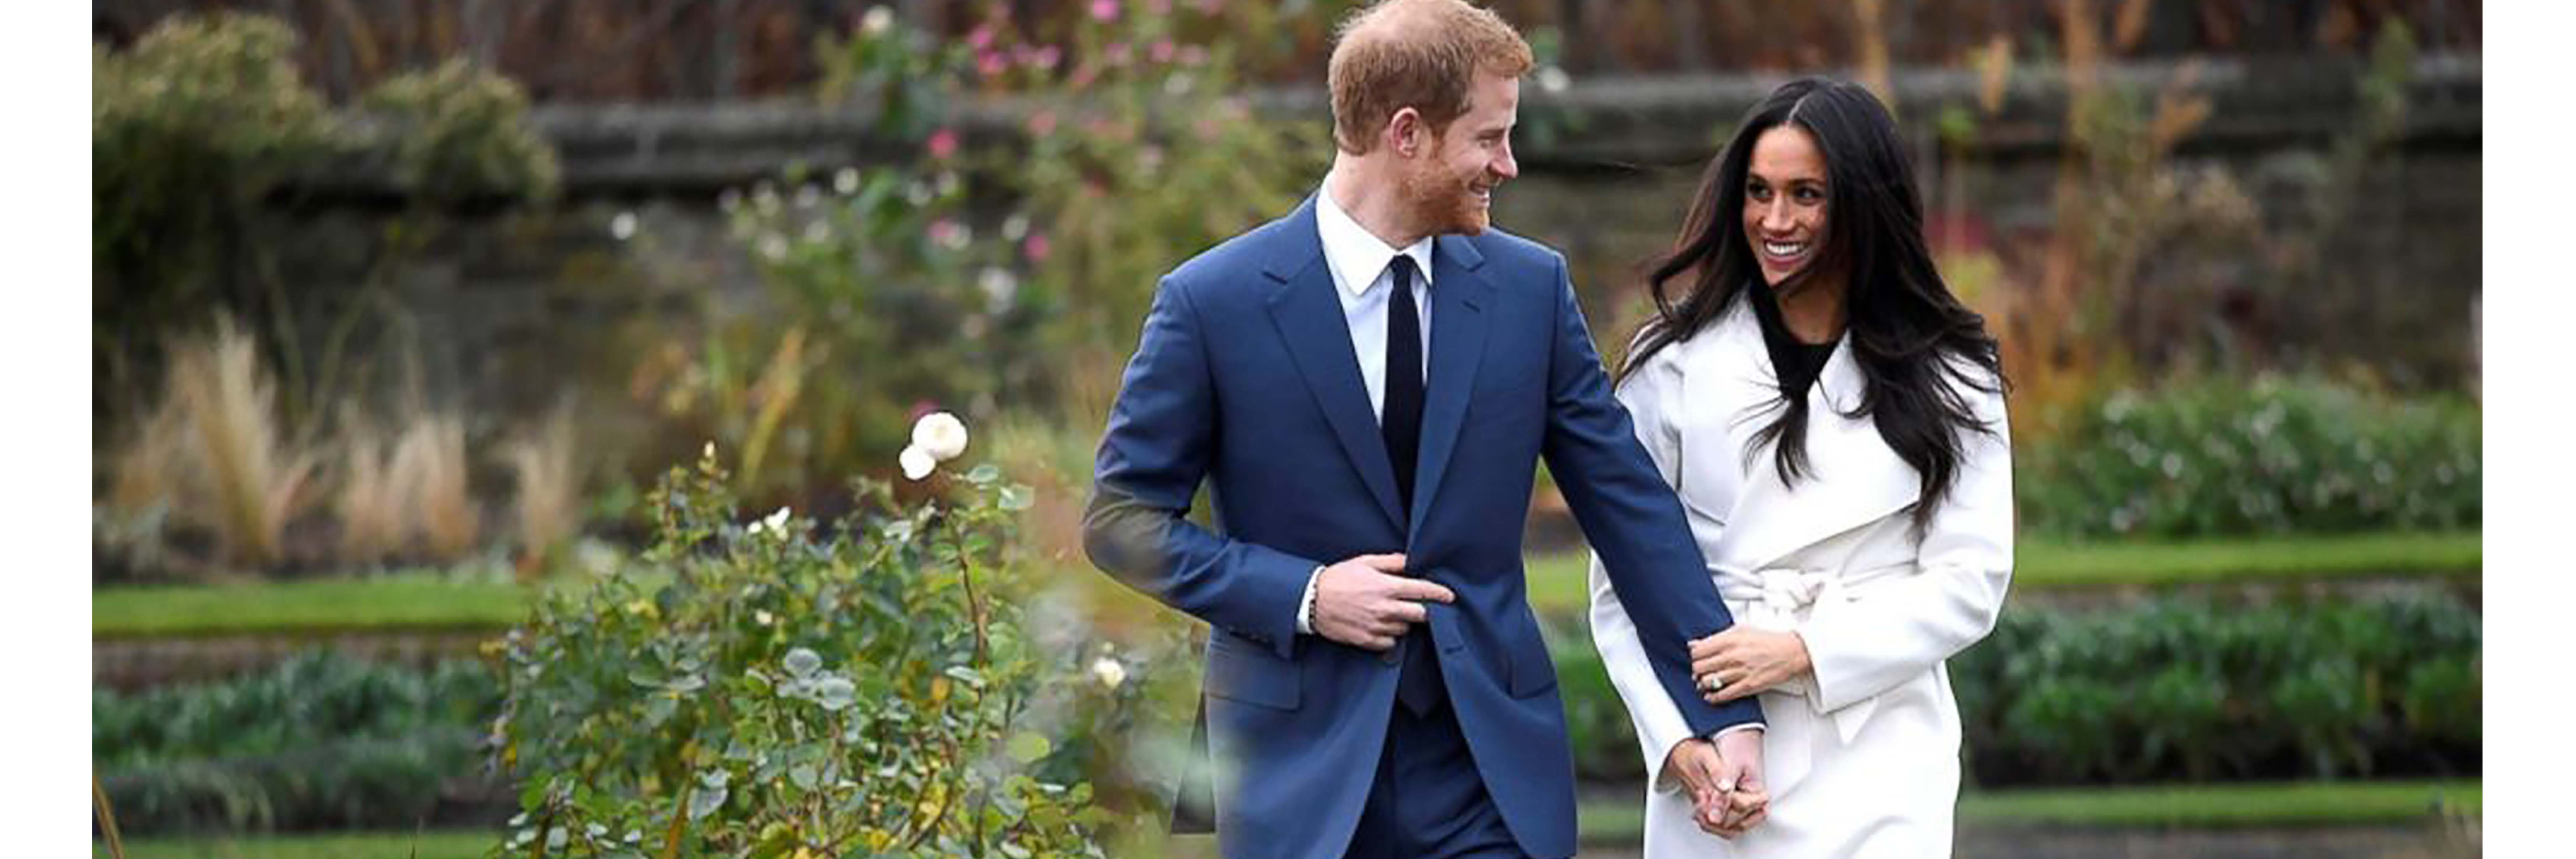 A Royal Price tag for a Royal Wedding: How does the Meghan/Harry wedding compare to the average commoners special day? 